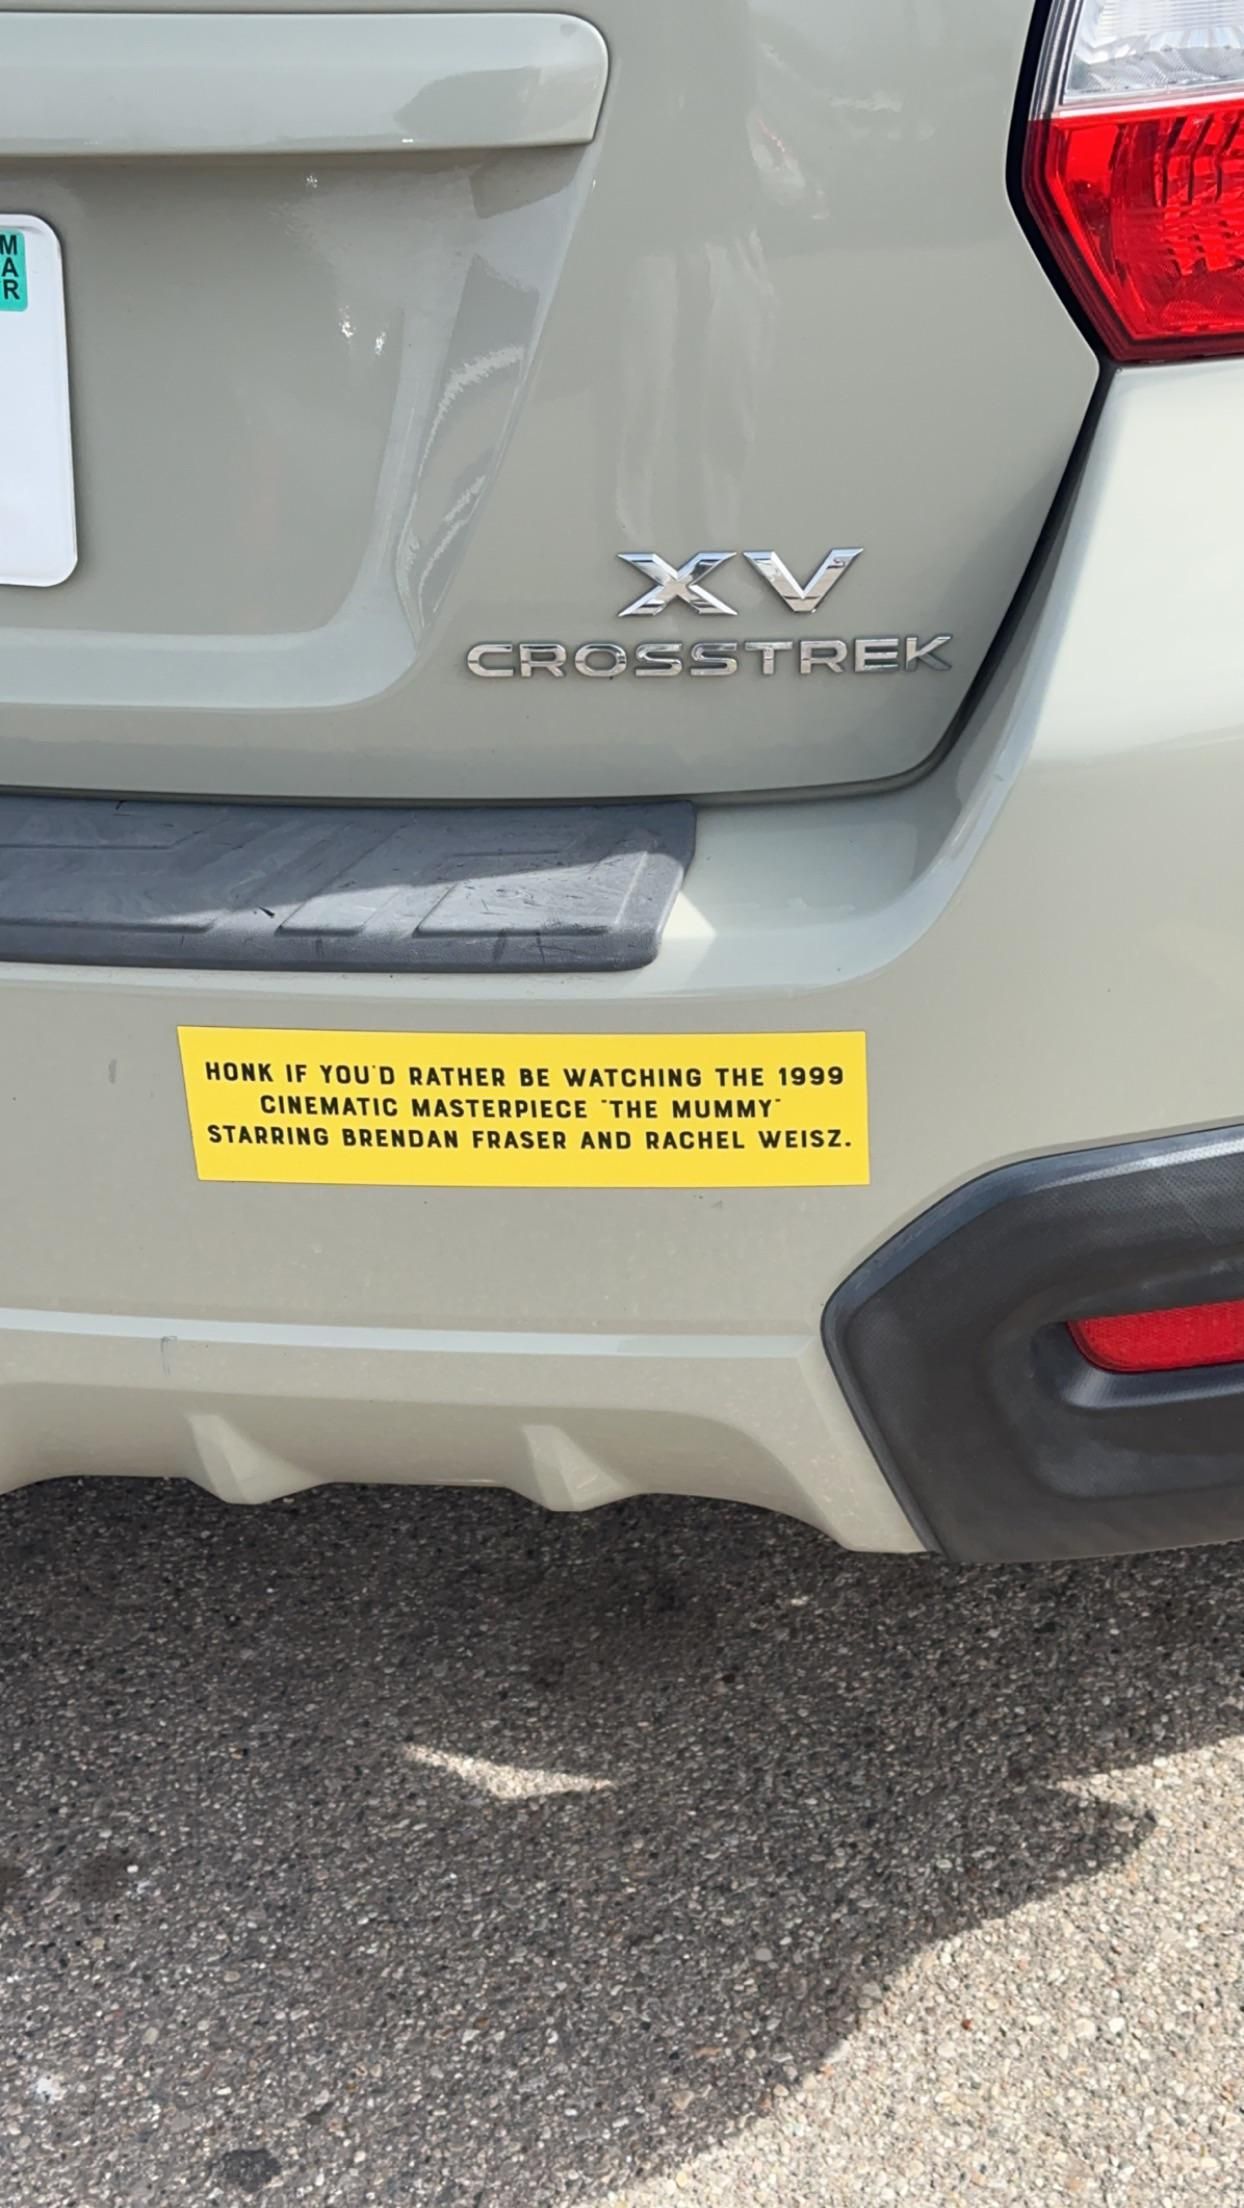 I normally don’t agree with bumper stickers. But this one? Yes.